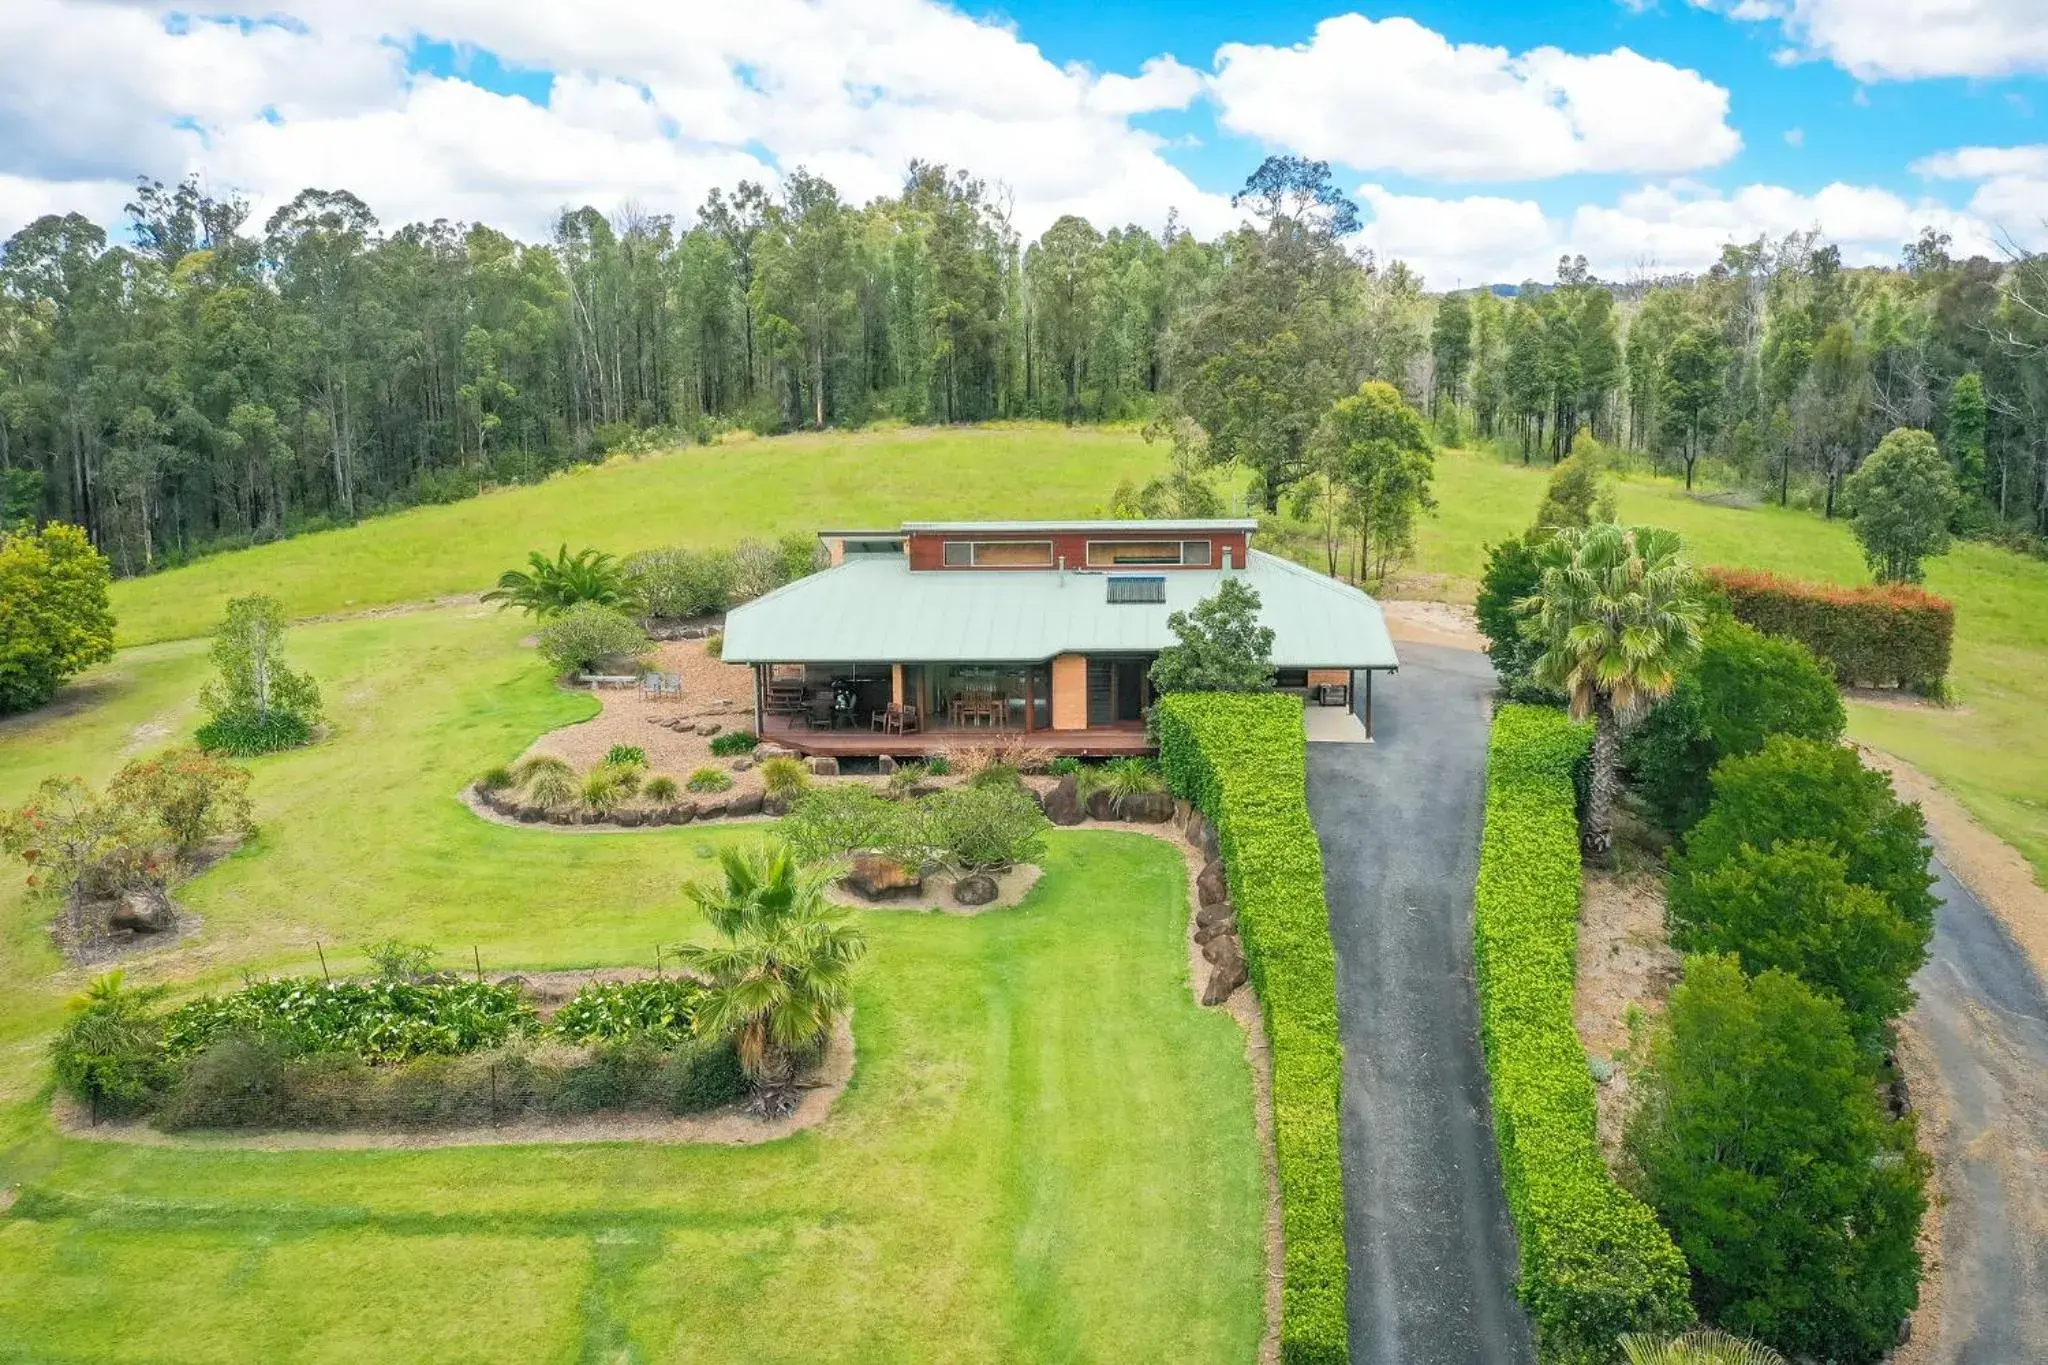 Property building, Bird's-eye View in Clarendon Forest Retreat